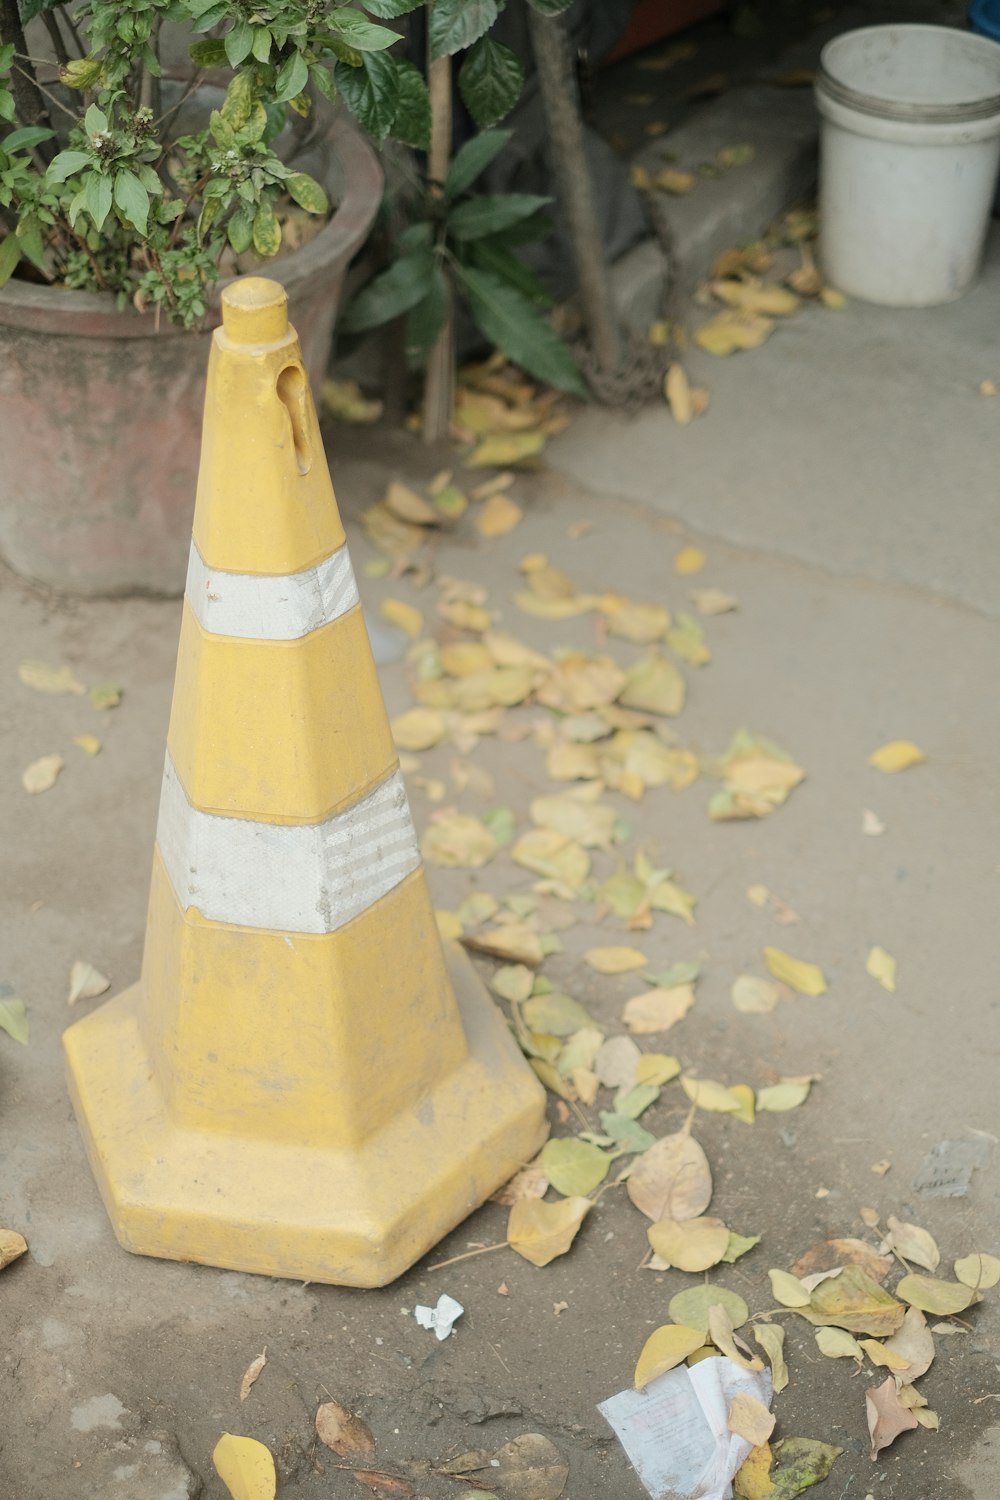 a traffic cone sitting on the ground next to a potted plant